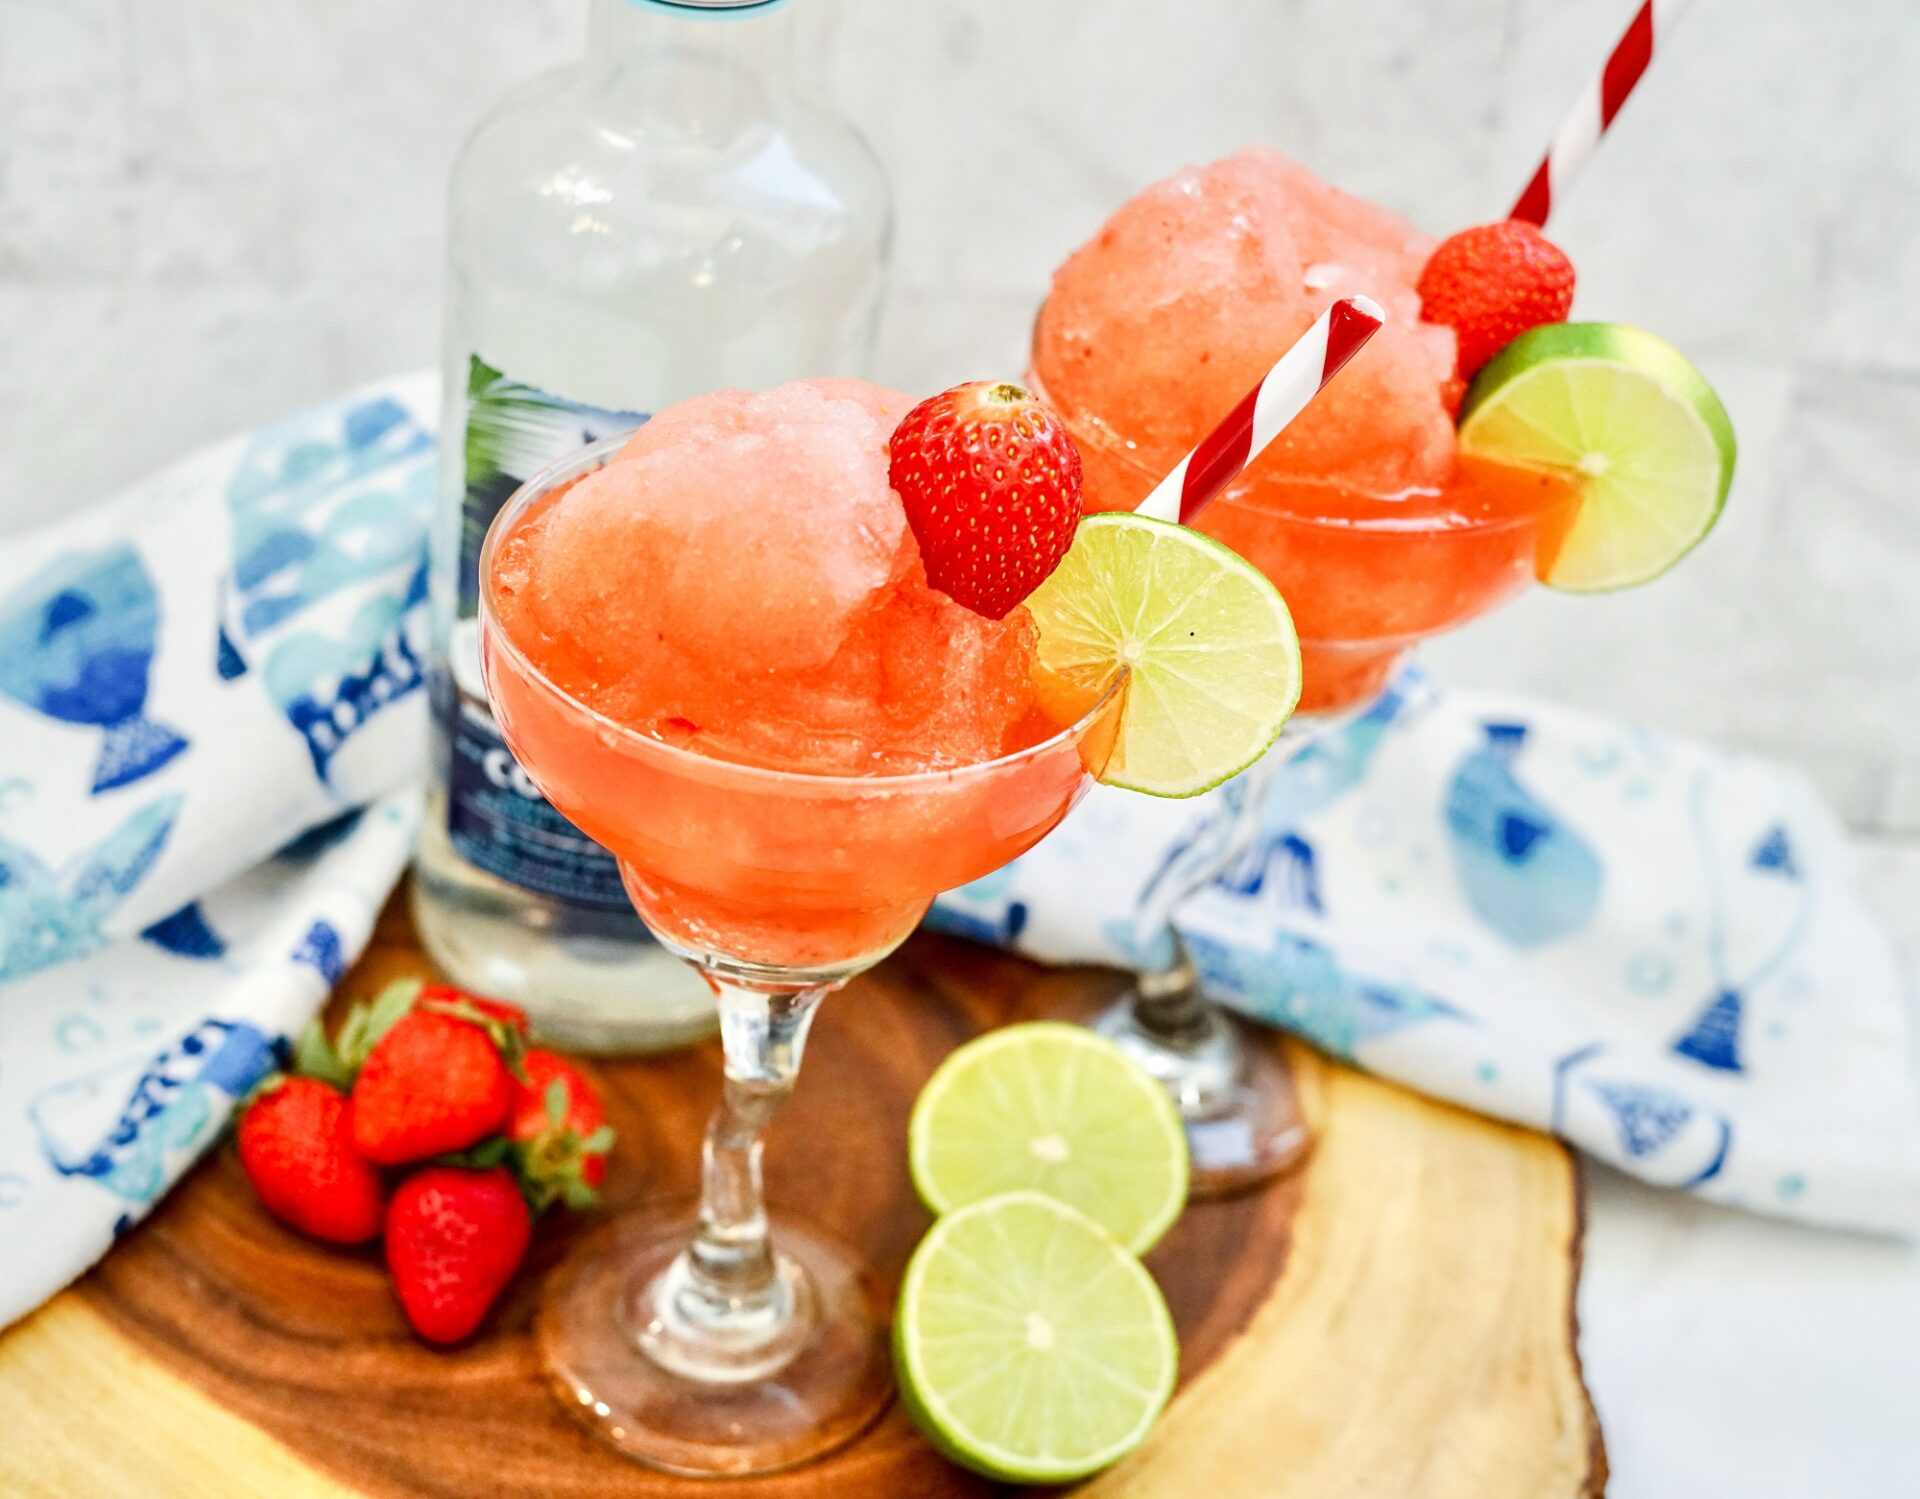 Strawberry Daiquiri in a cocktail glass with lime slice garnish.